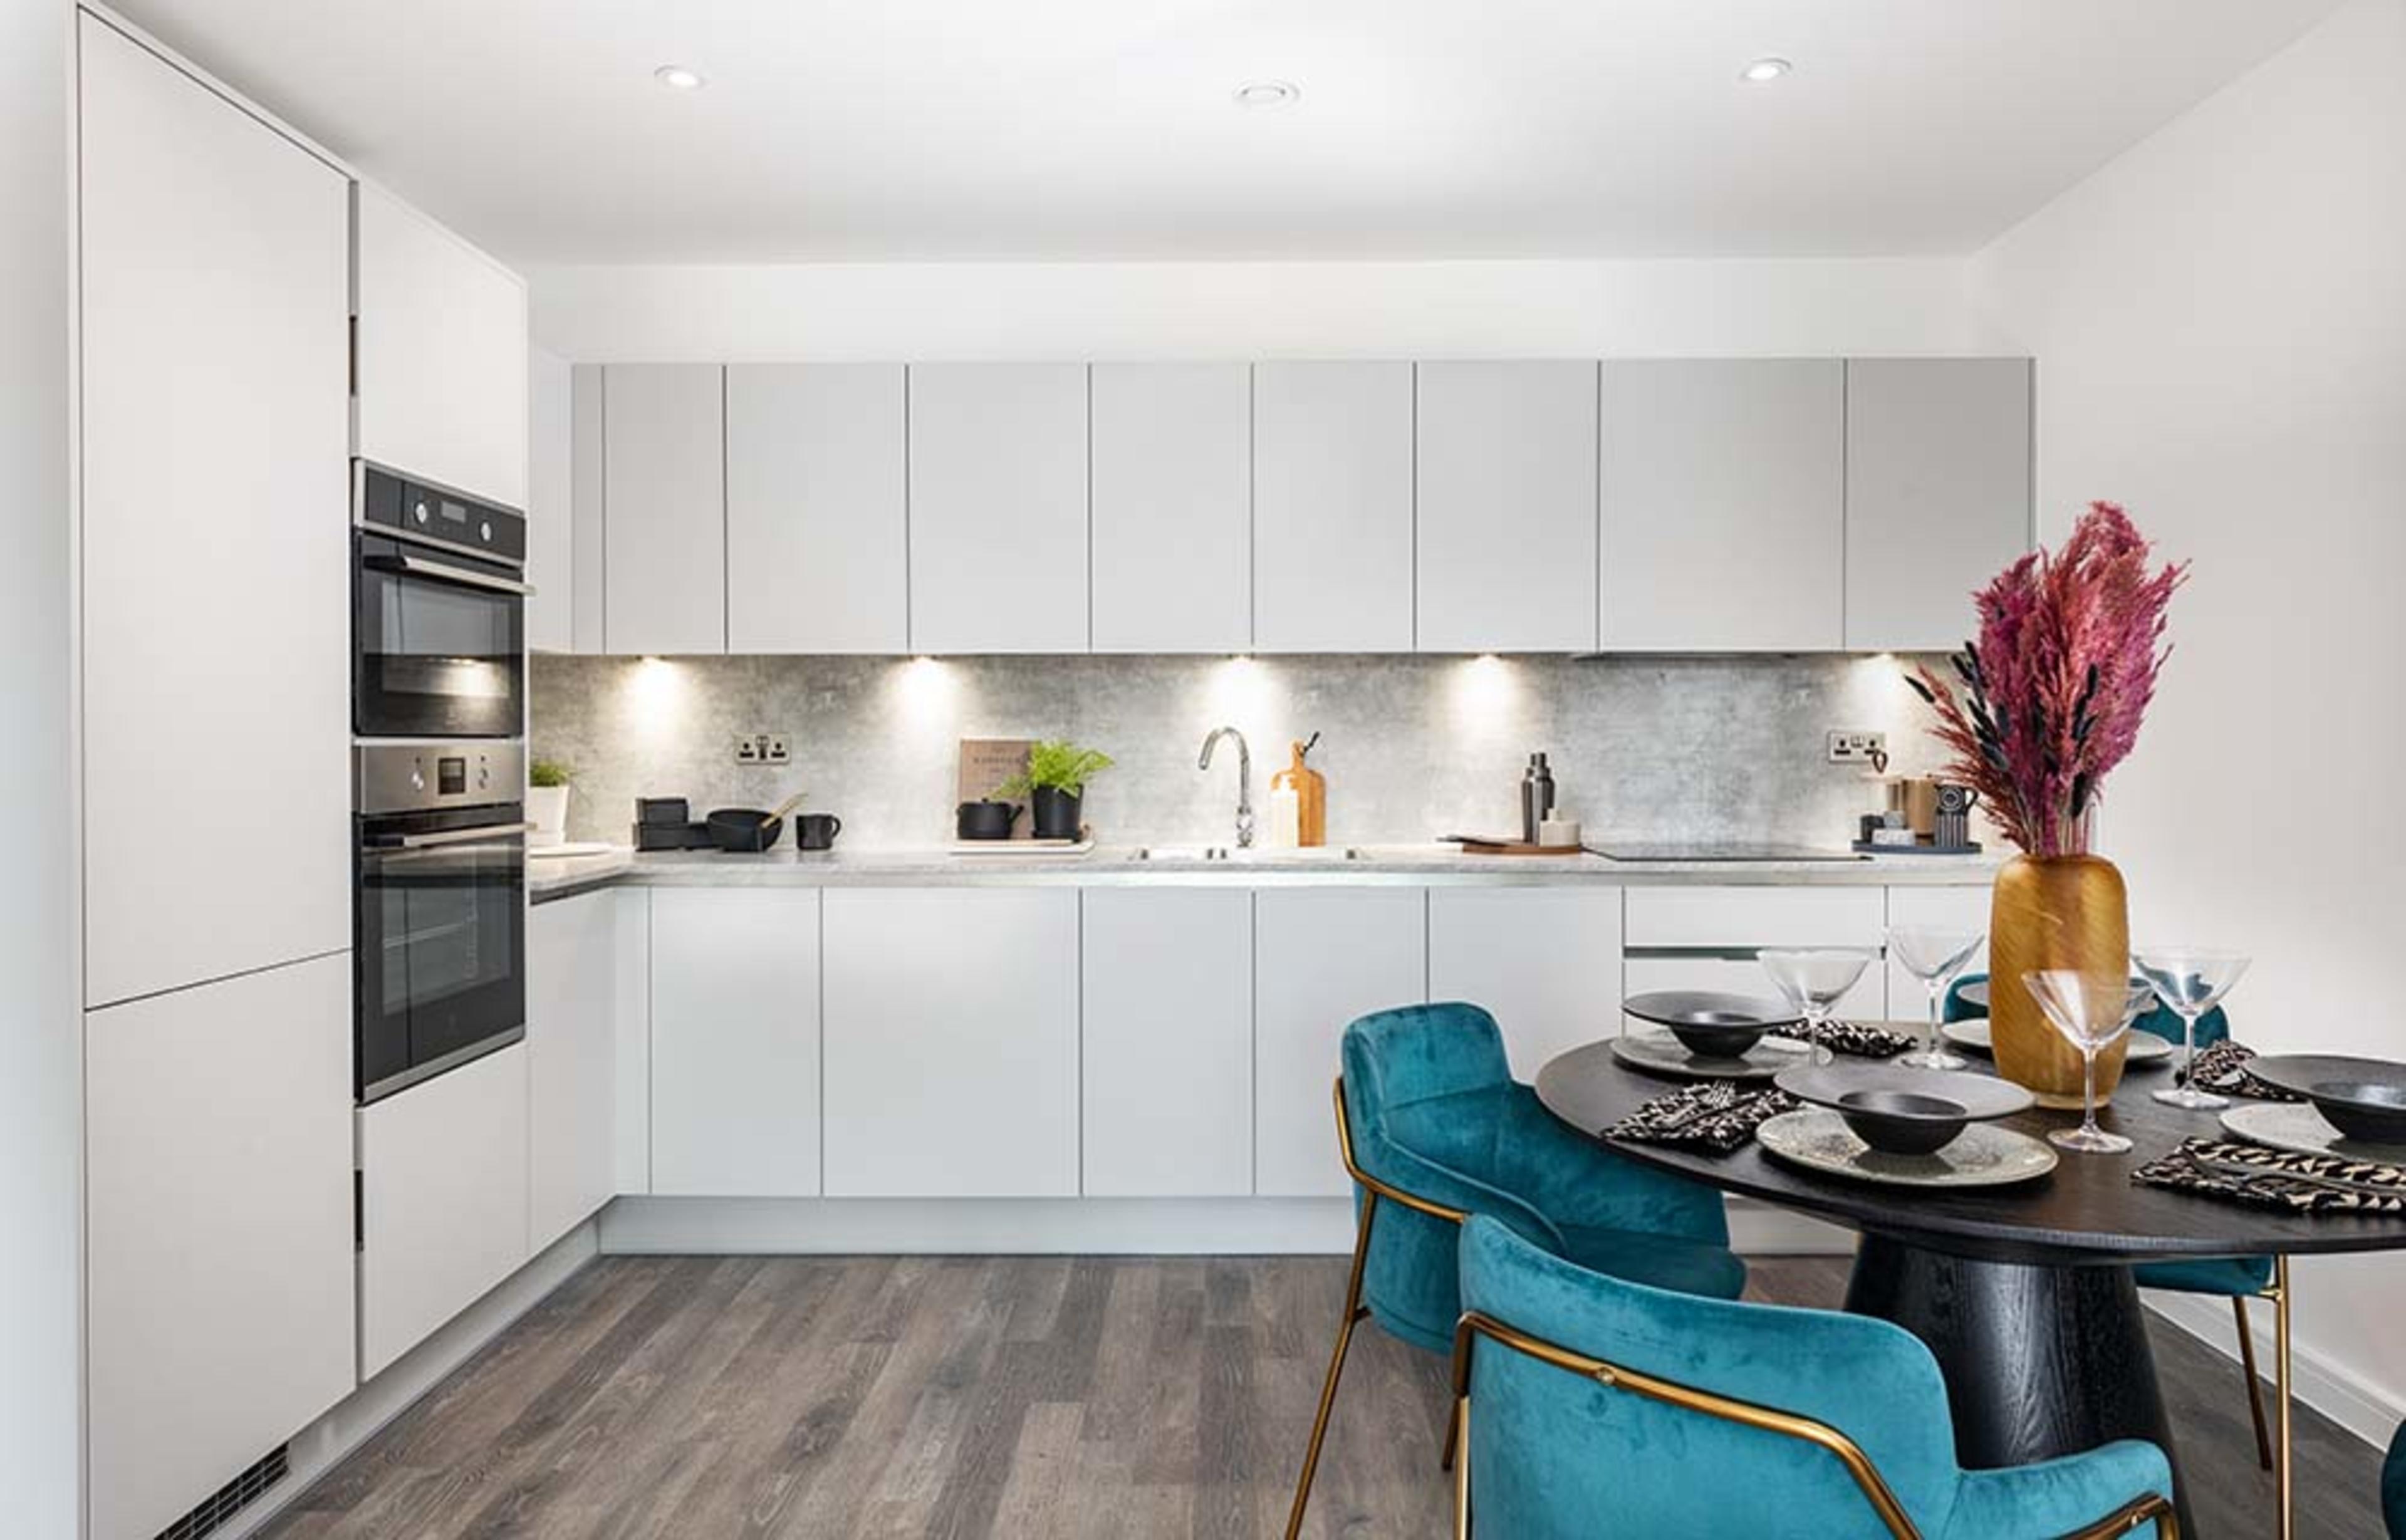 persona-homes-carlton-place-flats-for-sale-kitchen